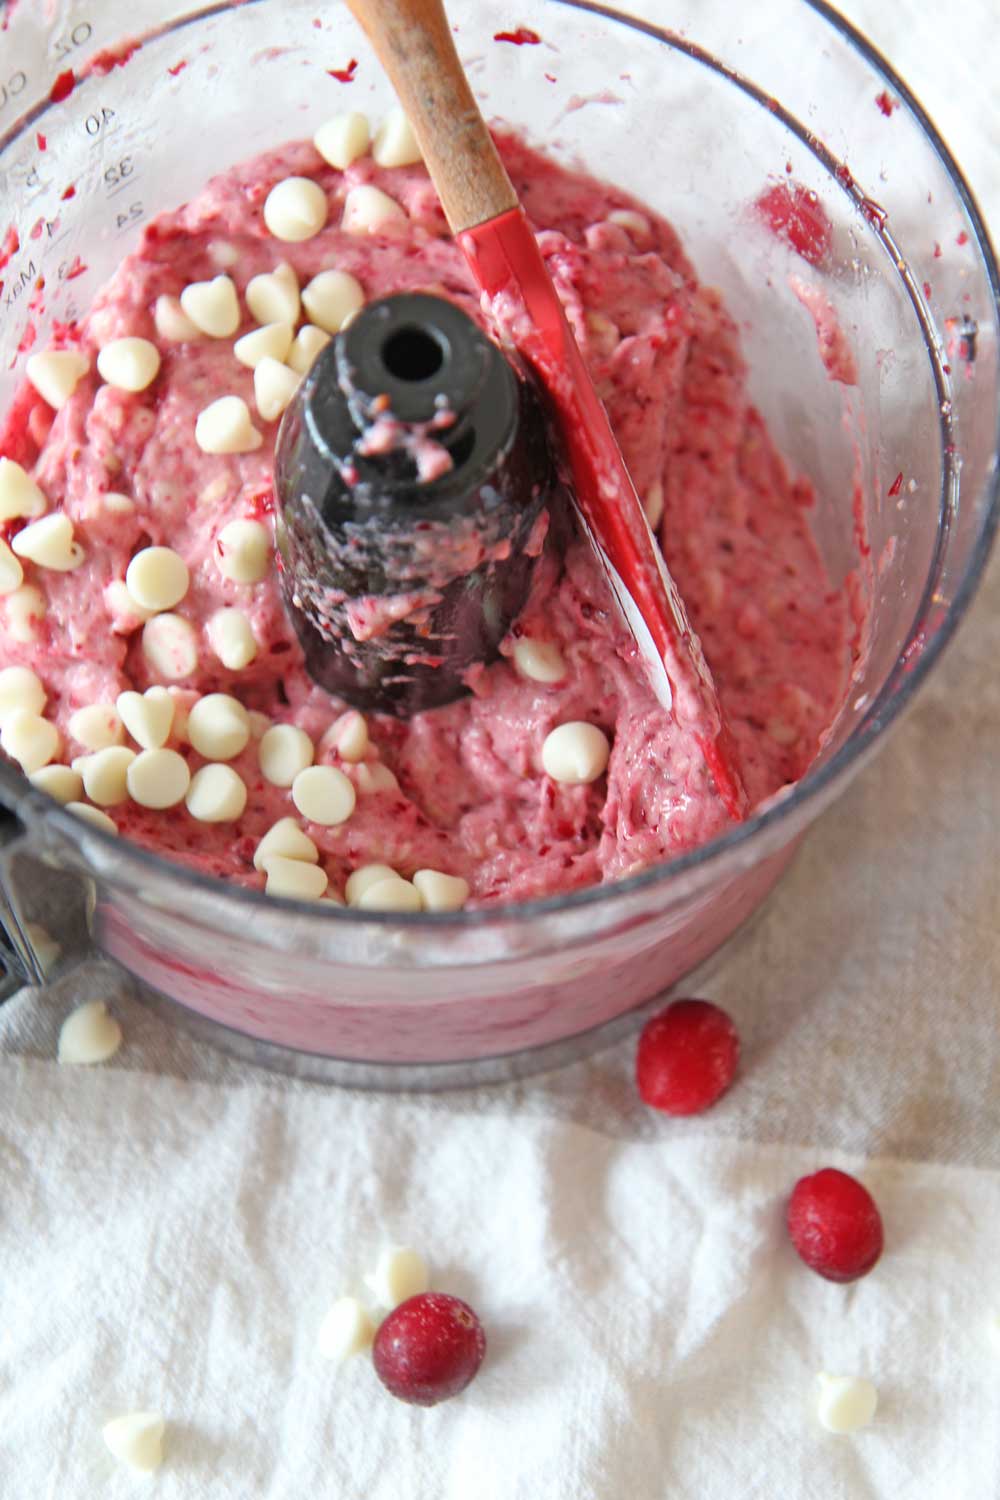 3 Ingredient Frozen Cranberry White Chocolate Ice Cream. Just cranberries, bananas, and white chocolate chips in this recipe. Easy ice cream with no churn or machines. Happy Dessert Making! www.ChopHappy.com #cranberryRecipes #icecream